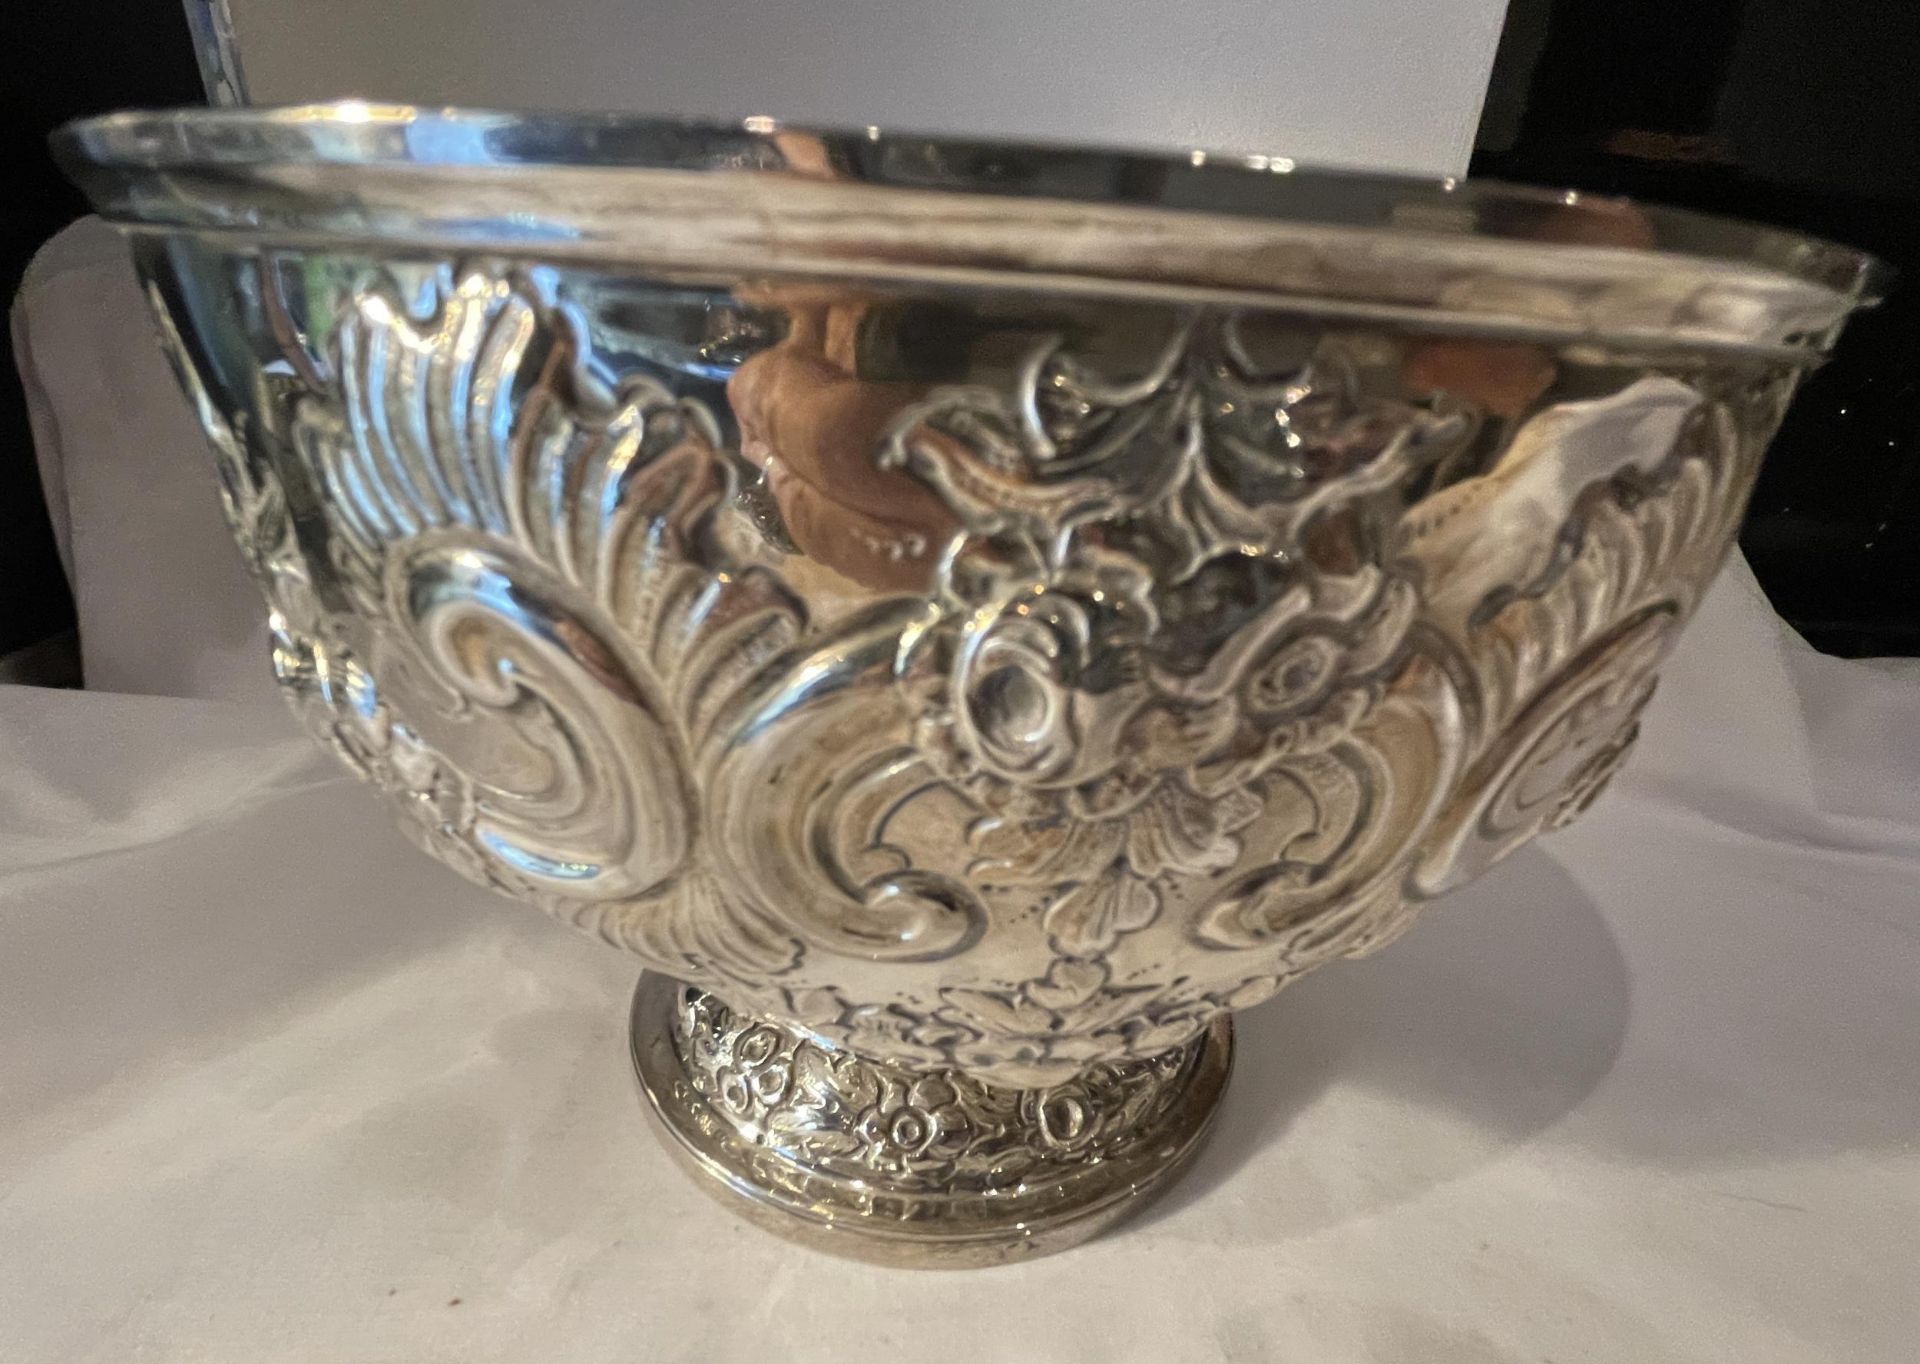 A 1901 HALLMARKED LONDON SILVER DECORATIVE FOOTED BOWL, INDISTINCT MAKER, GROSS WEIGHT 385 GRAMS - Image 2 of 15